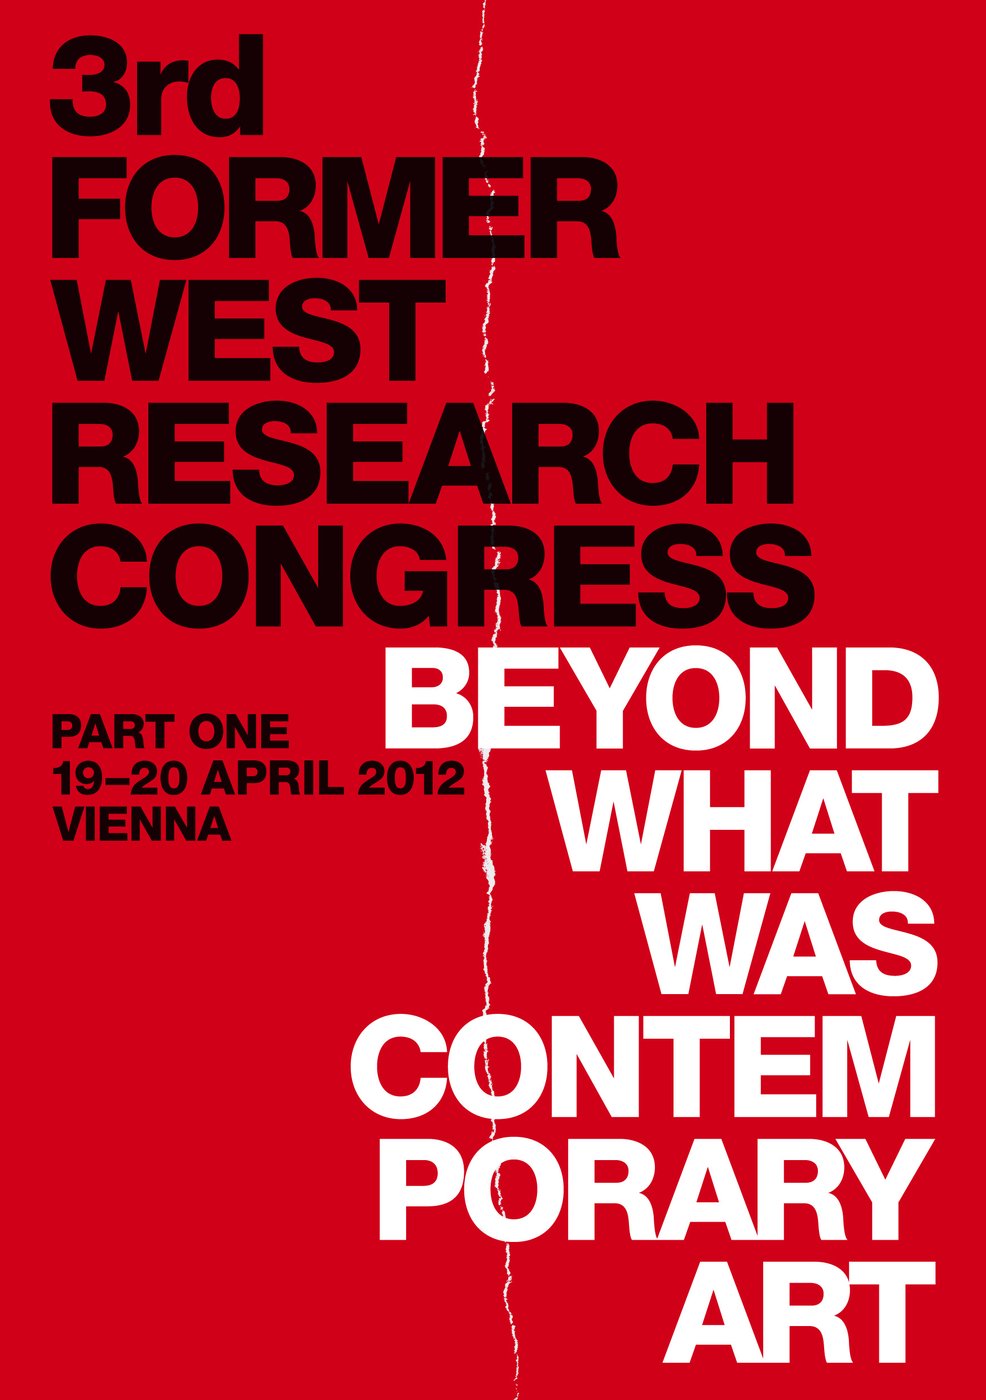 The Congress is organized by BAK, basis voor actuele kunst in cooperation with Secession, Vienna and the Academy of Fine Arts.
 
 The Congress is in English. Admission is free, however, due to limited seating registration is recommended.